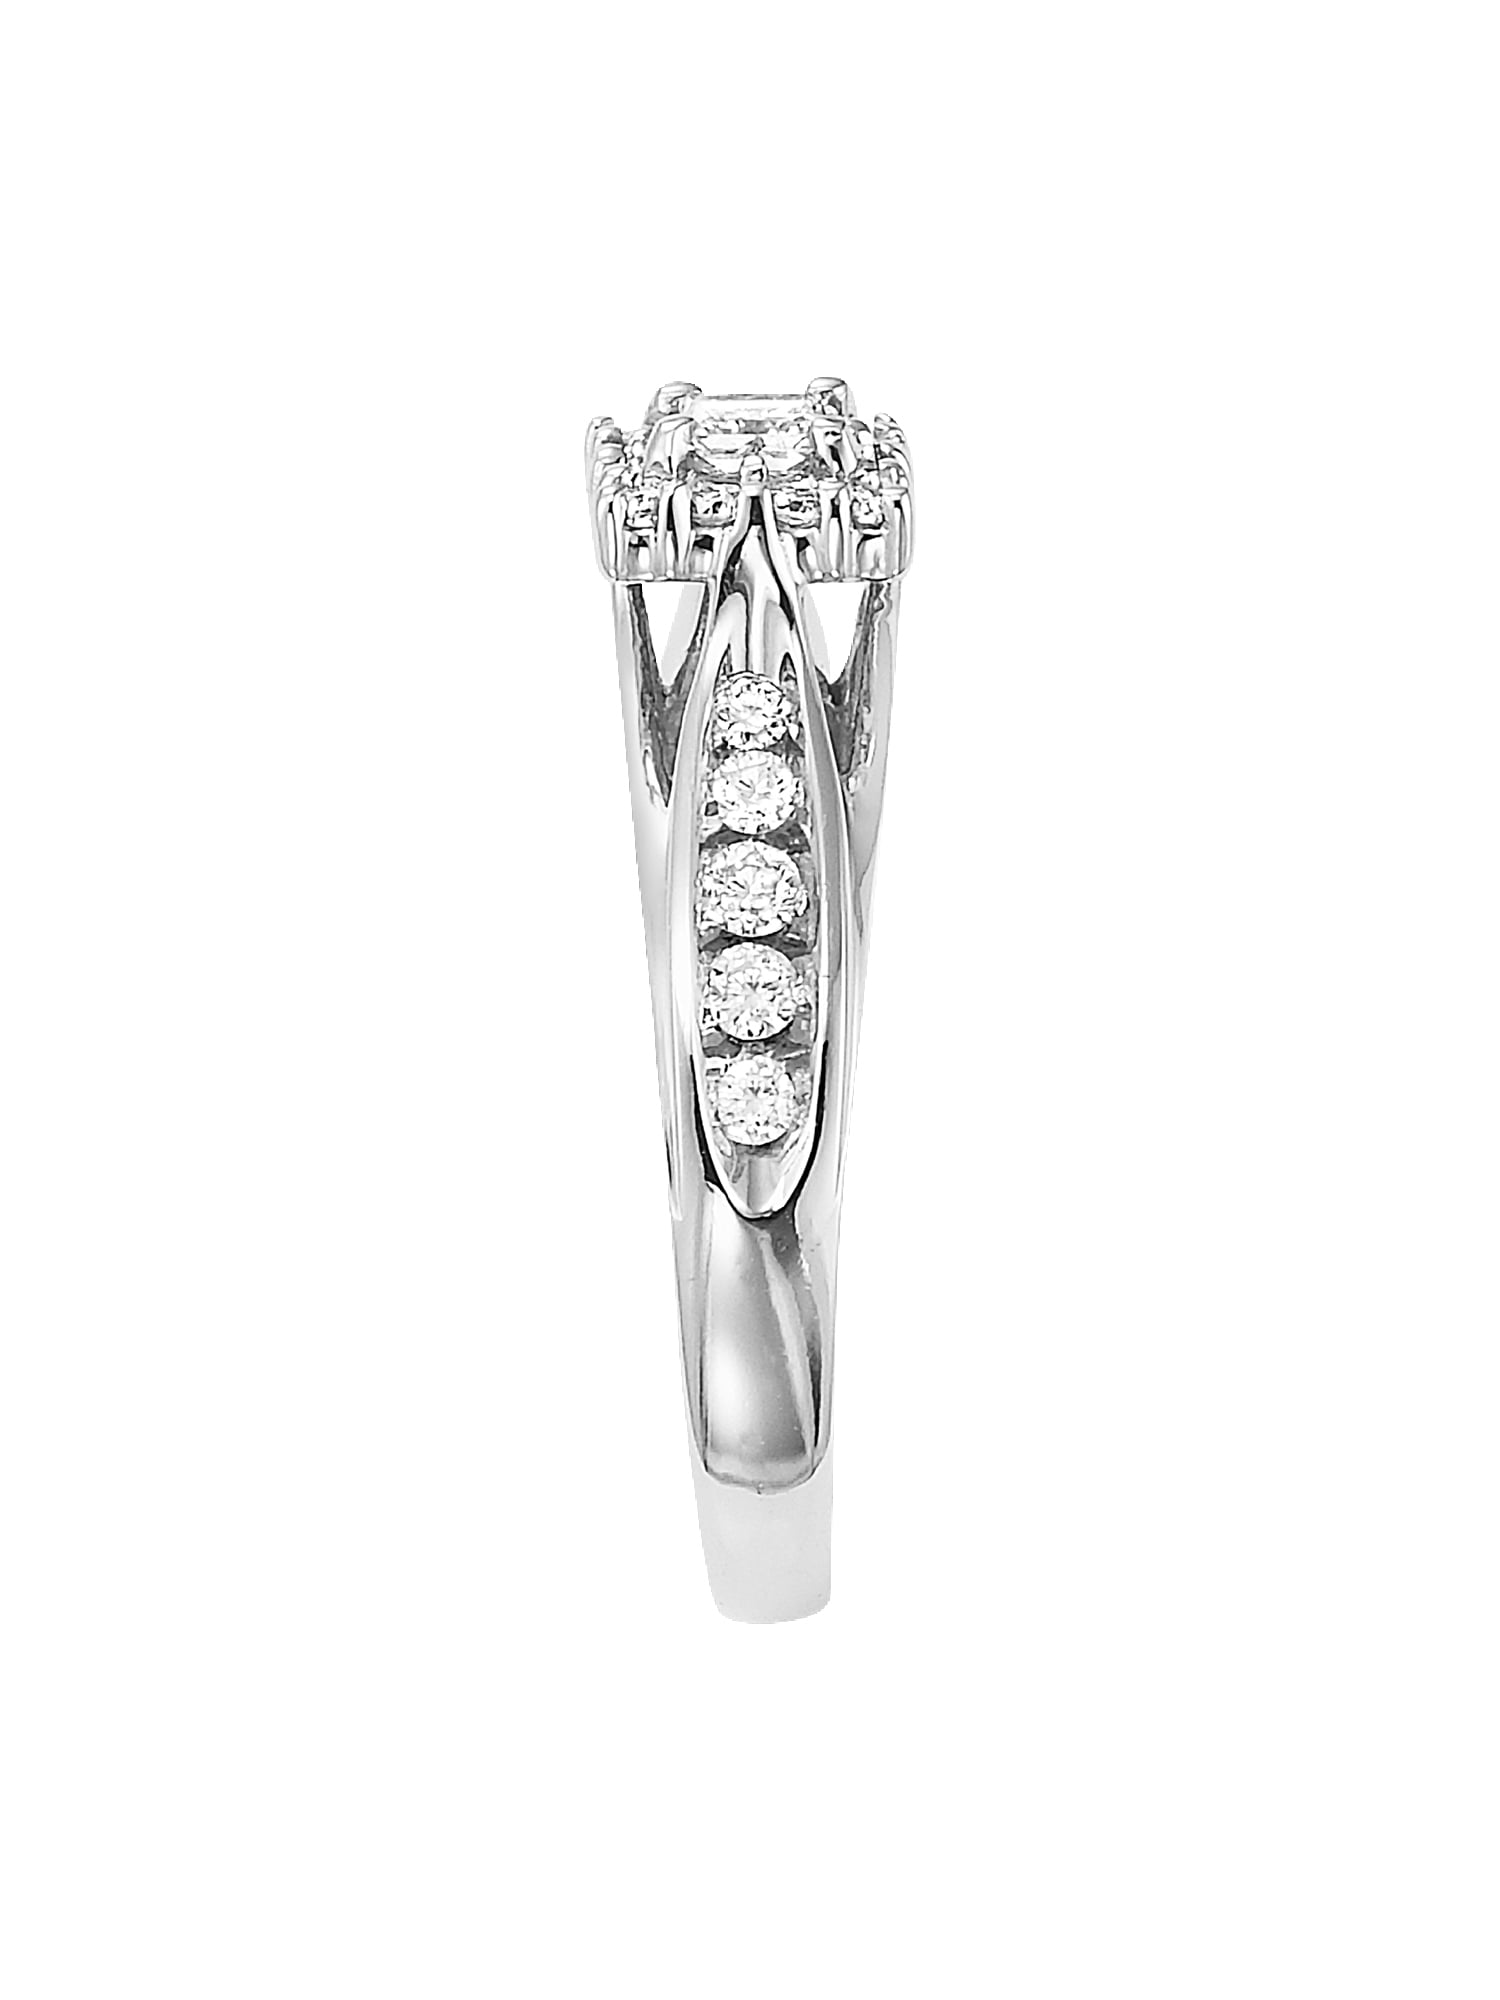 14K White Gold Die-Struck 6-Prong Tall Heavy Peg Head Setting To 5 Ct 1/4 Ct